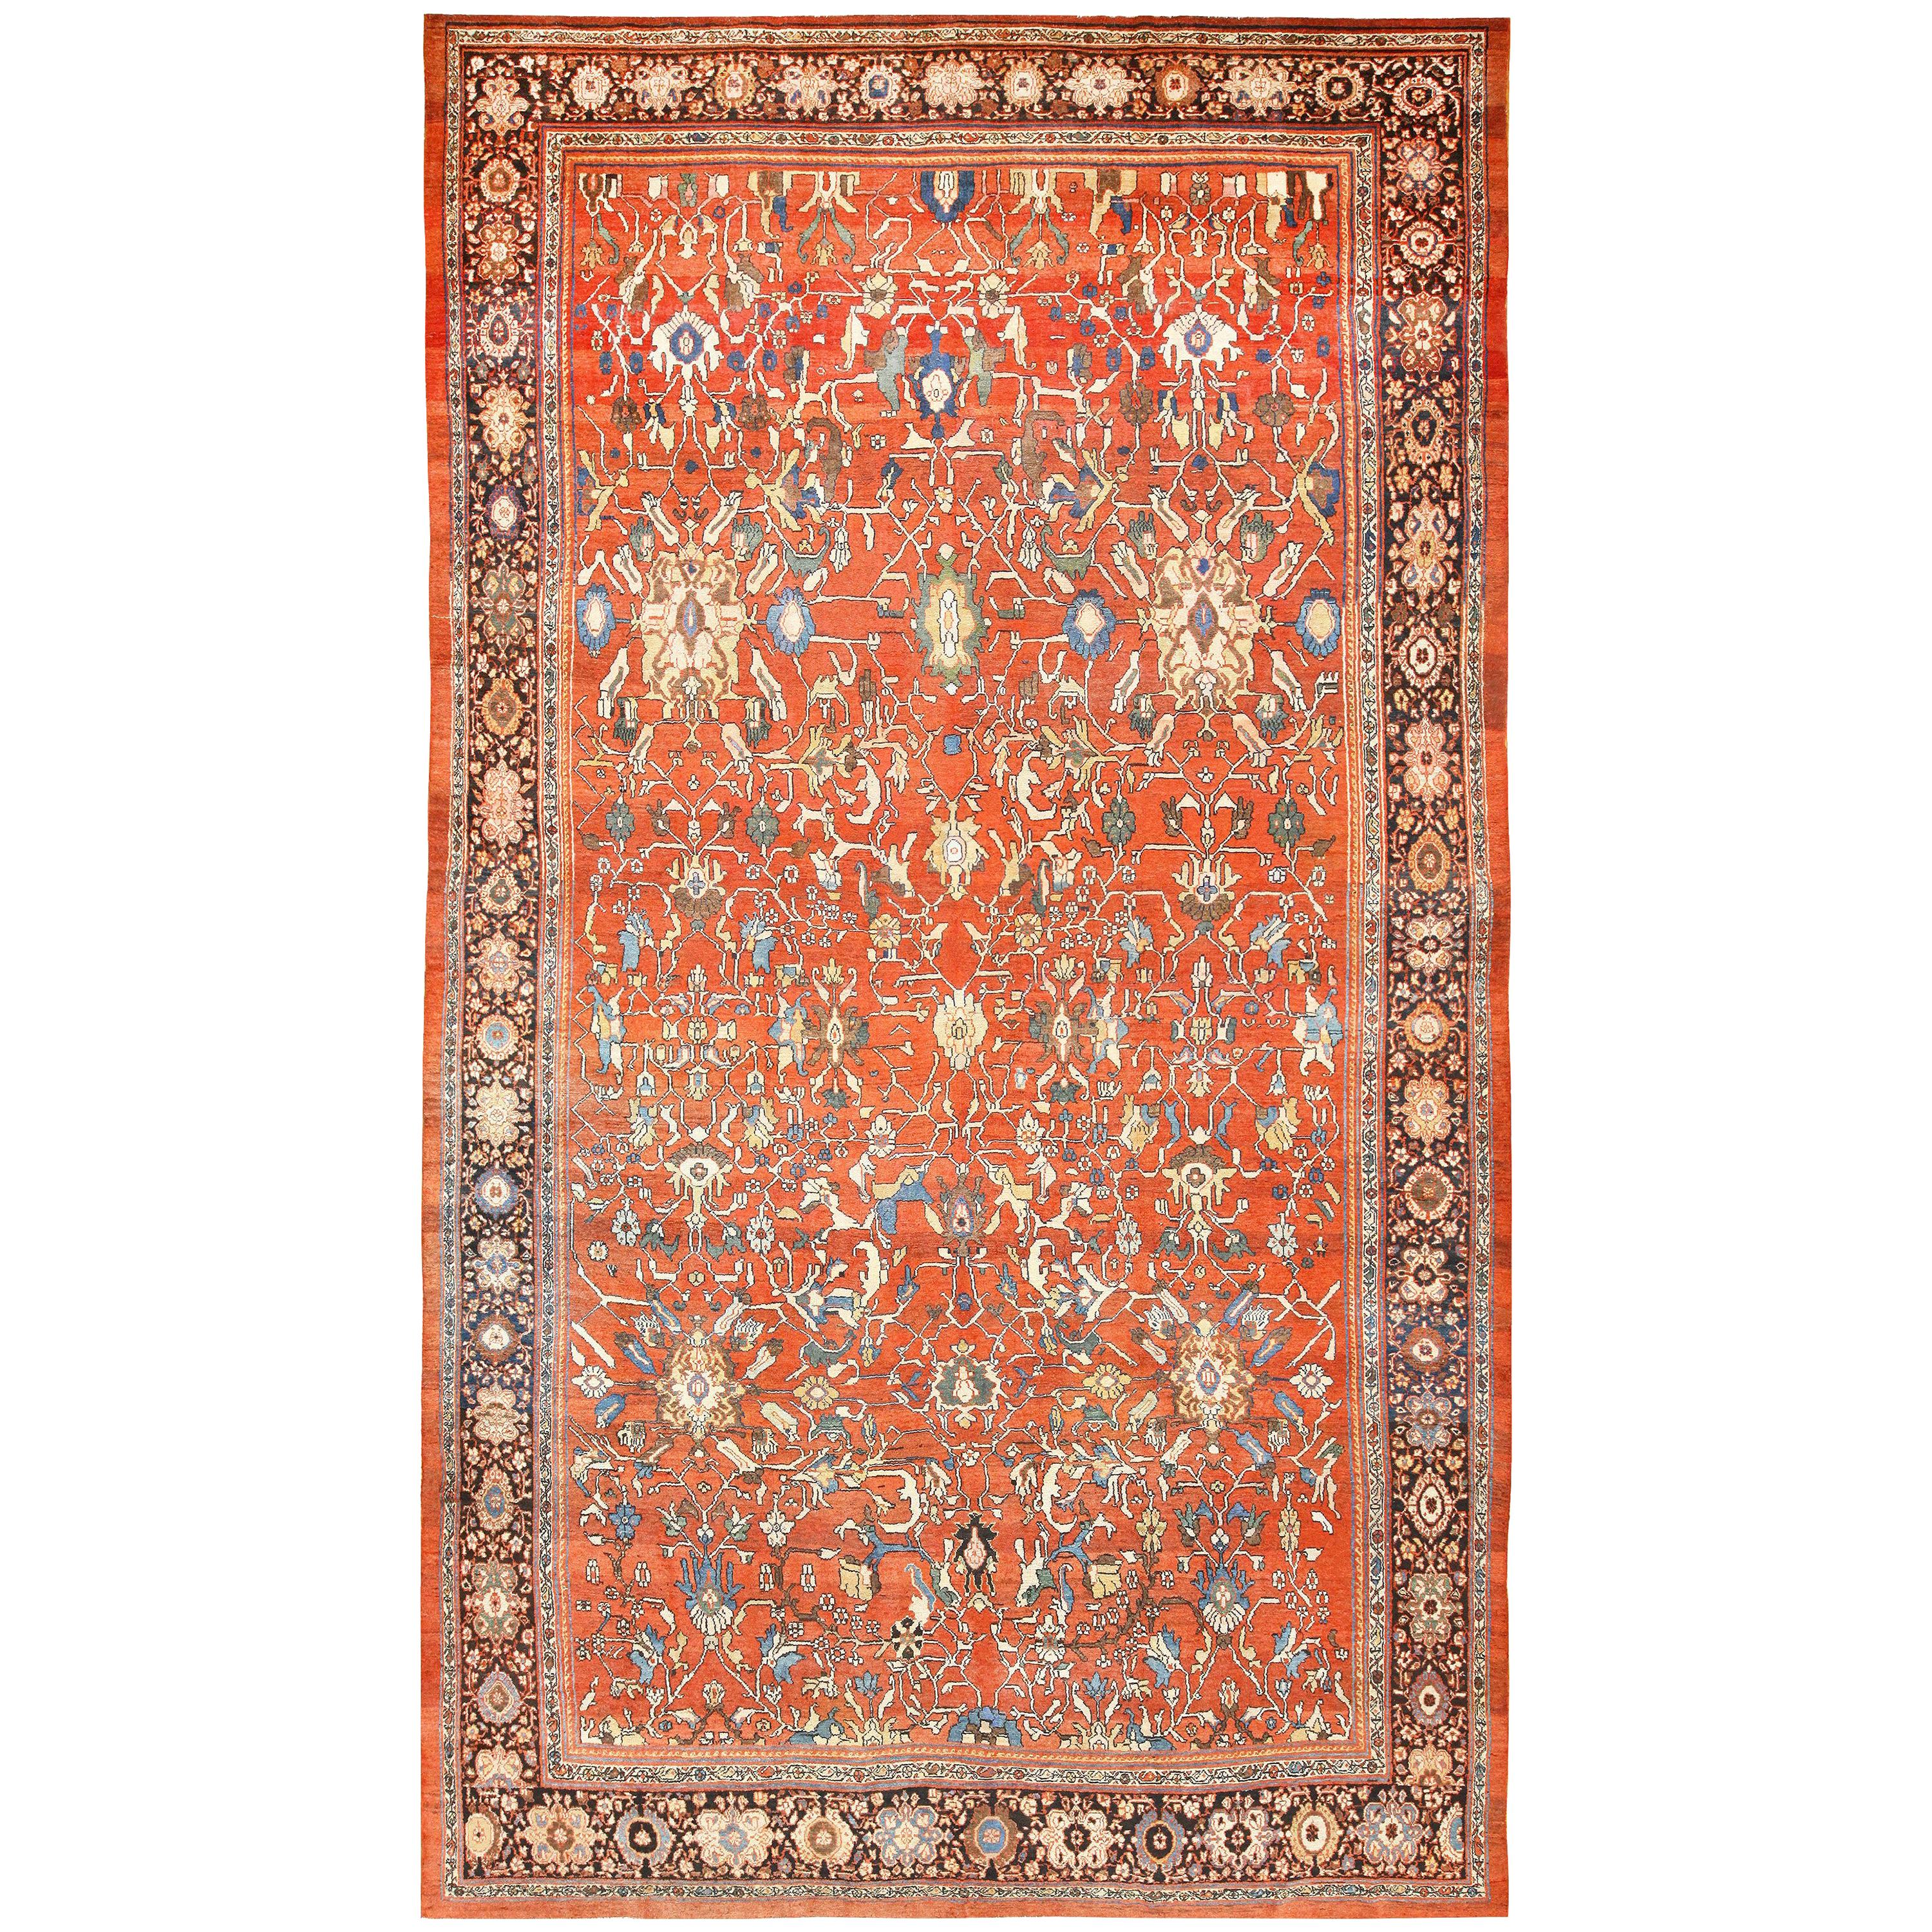 Antique Persian Sultanabad Rug. Size: 13 ft 6 in x 23 ft For Sale